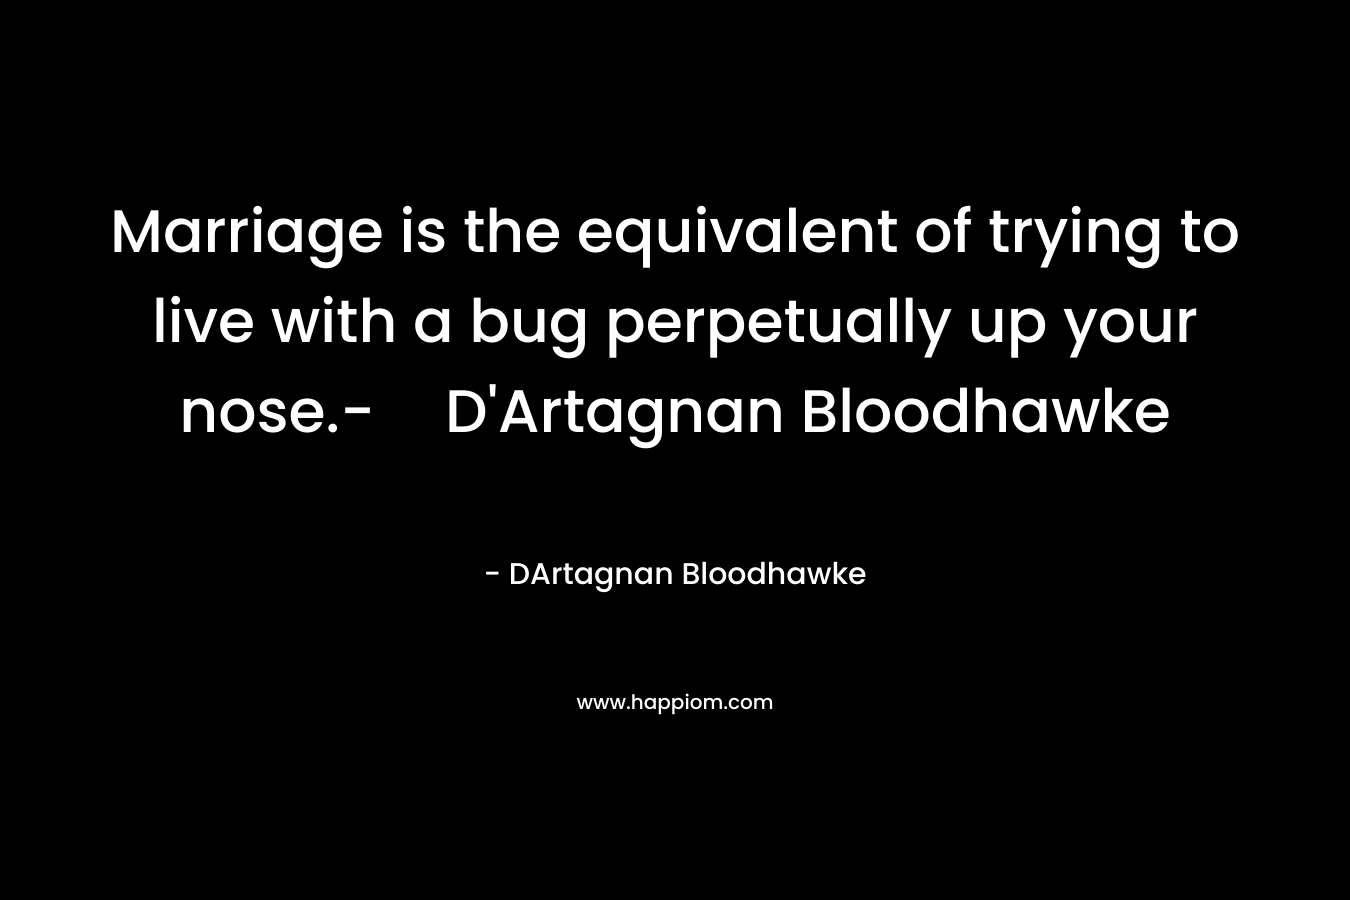 Marriage is the equivalent of trying to live with a bug perpetually up your nose.-D’Artagnan Bloodhawke – DArtagnan Bloodhawke